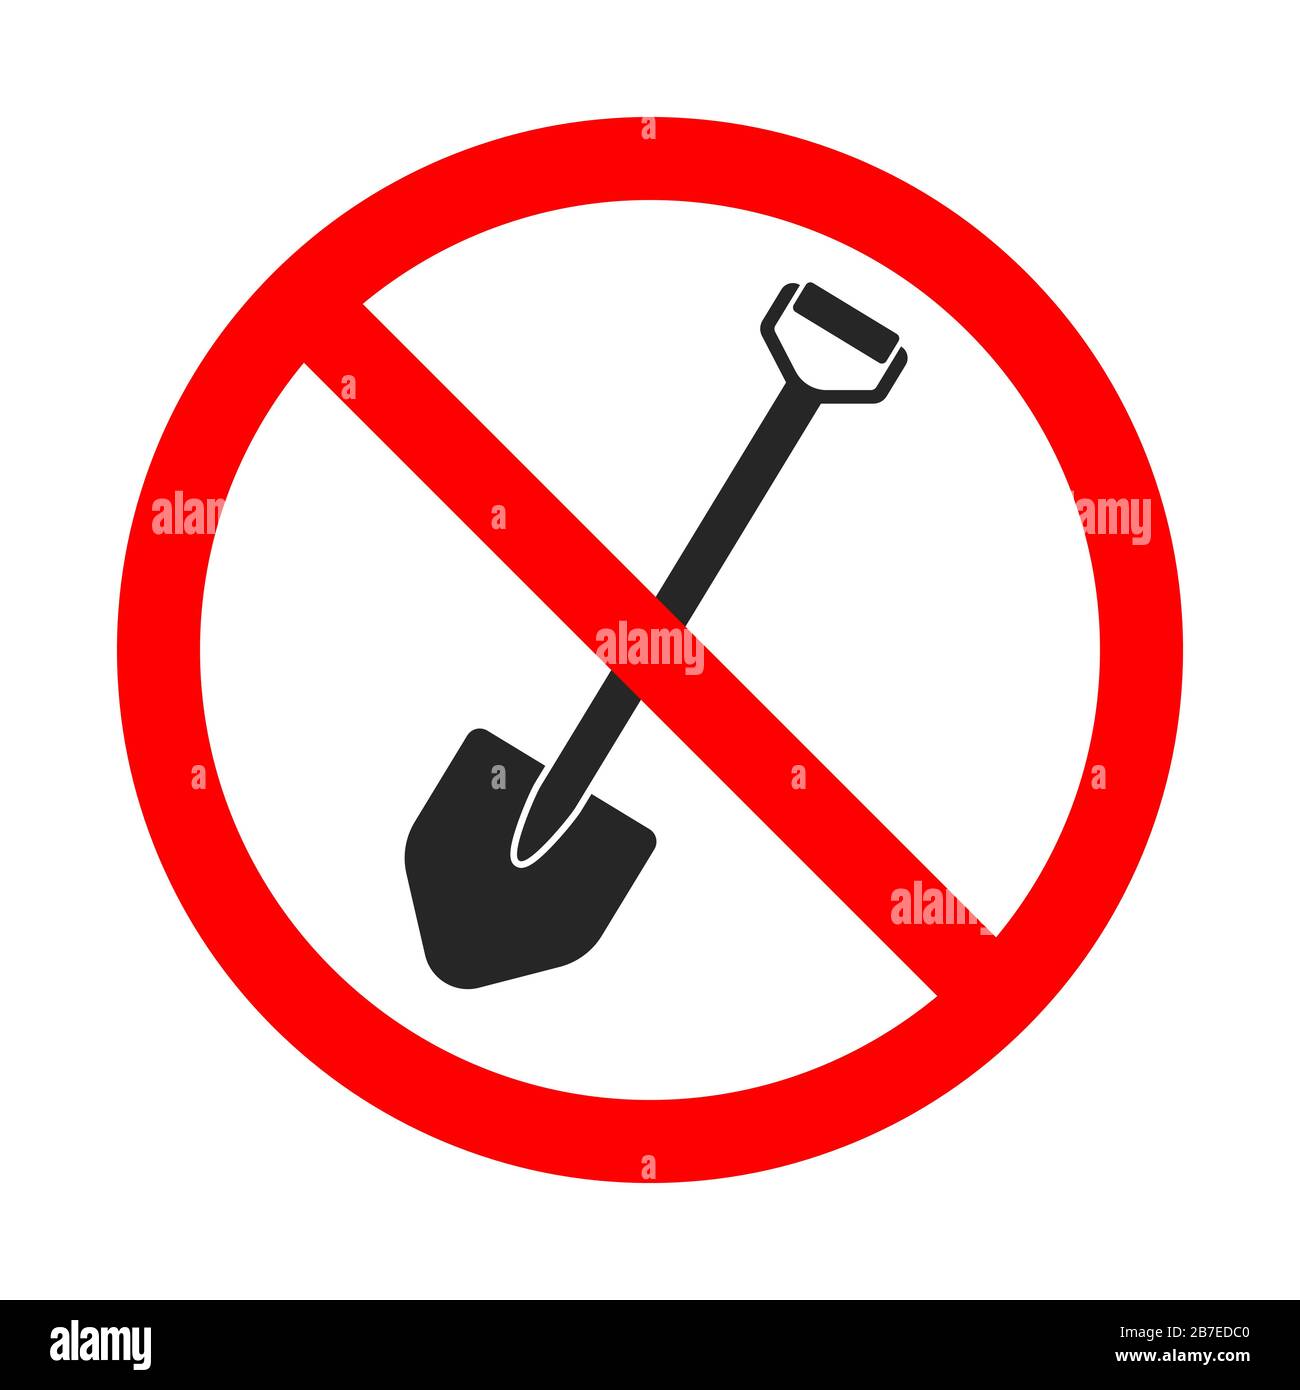 Shovel is forbidden. Digging is forbidden. Red prohibition sign of shovel. No shovel sign on white background. Vector icon isolated. Stock Vector